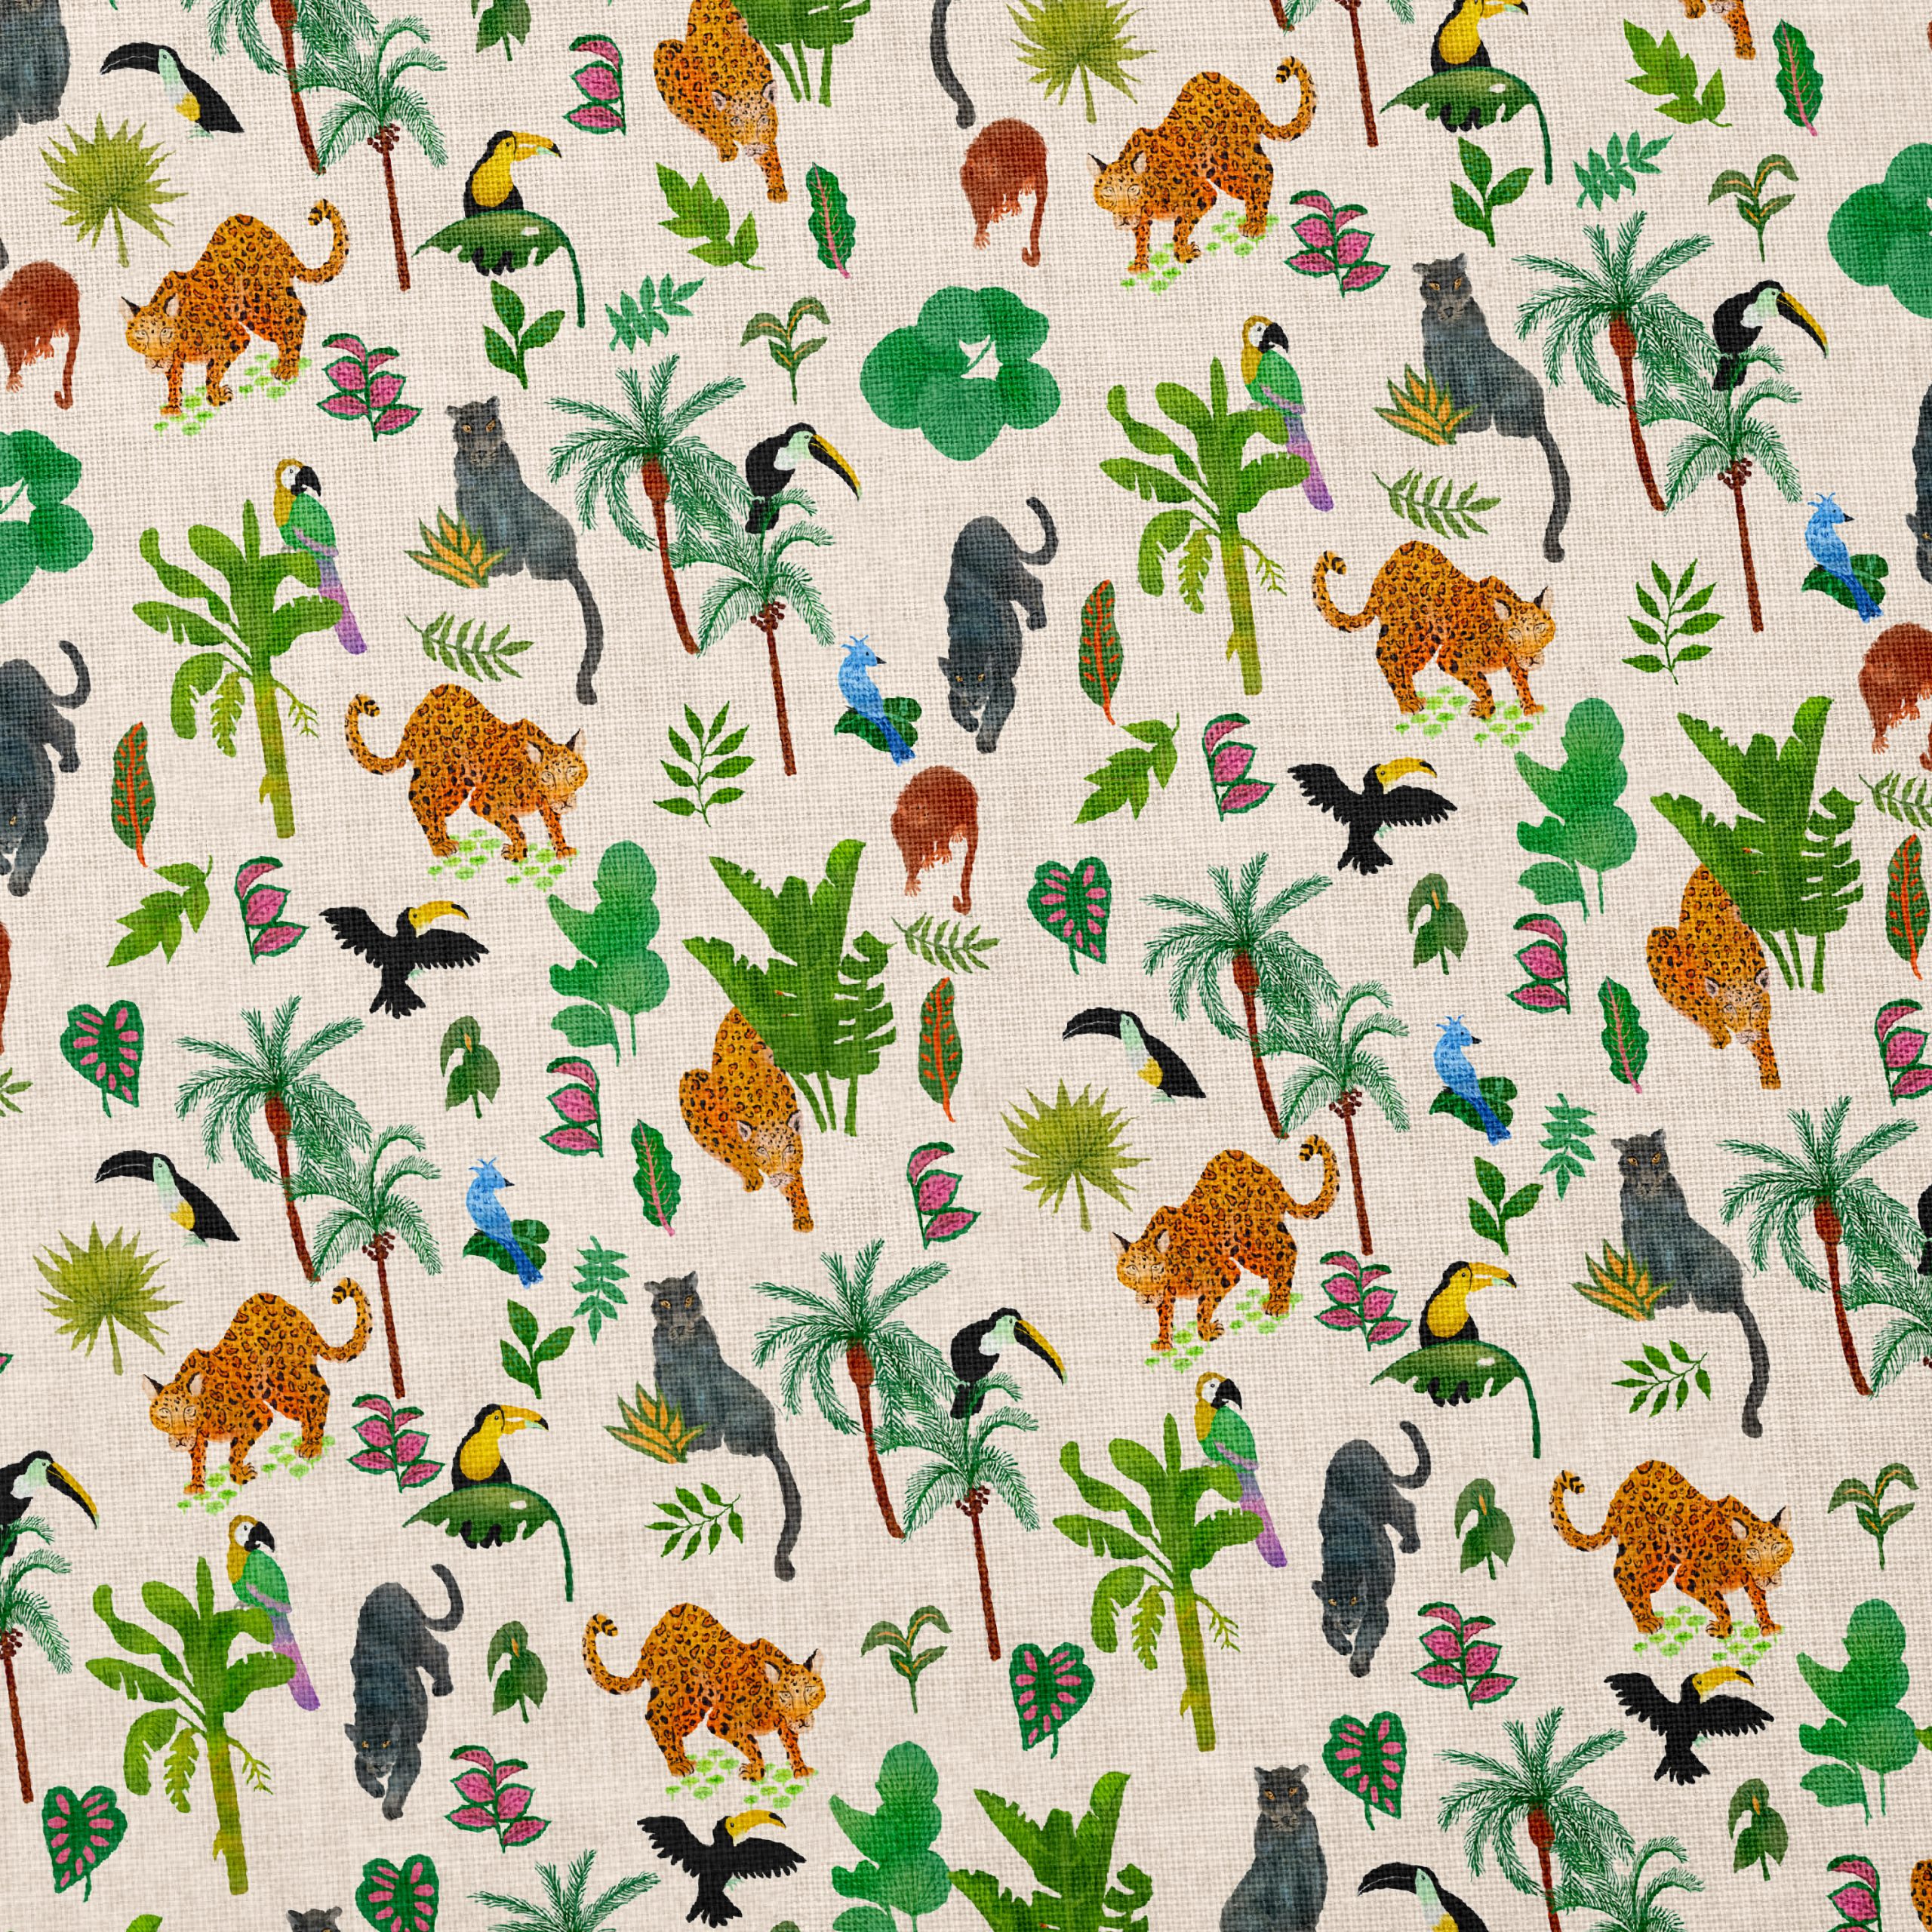 TEXTILES PATTERNS  "JUNGLE COLLECTION"